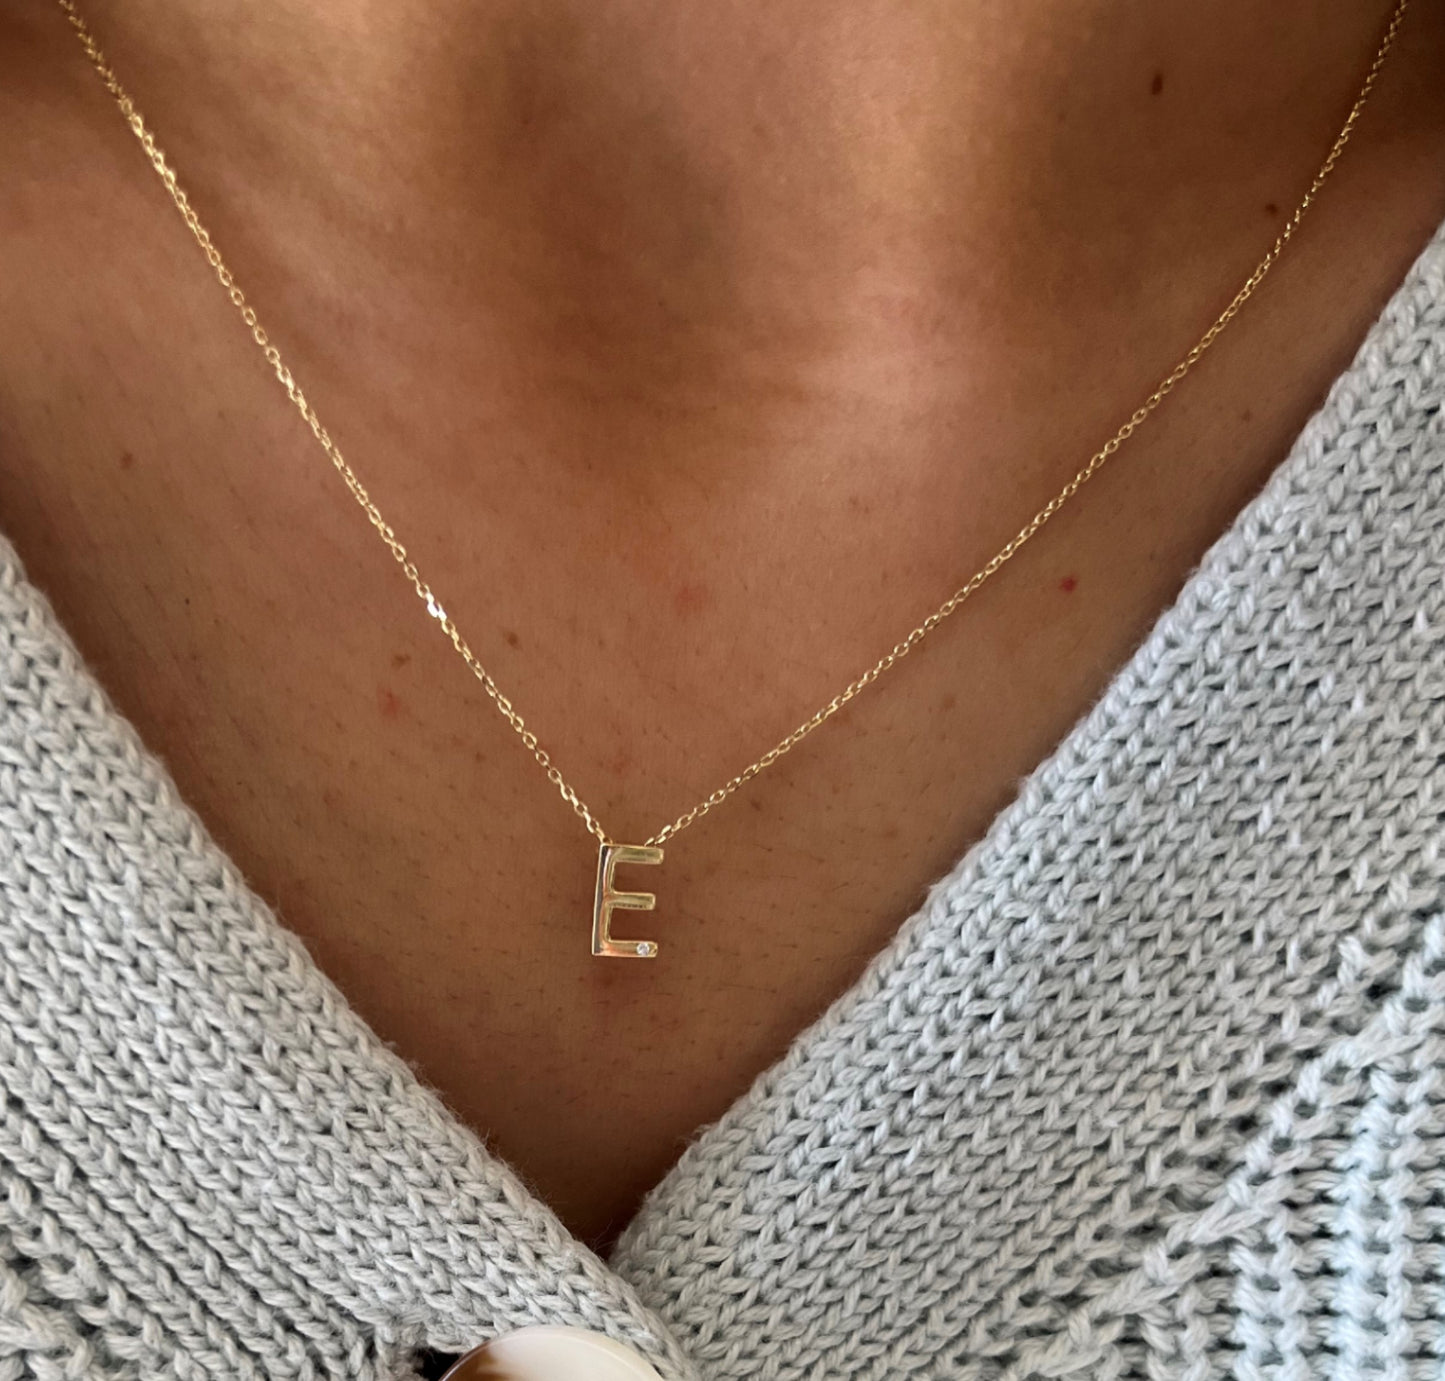 Gold & Crystal Initial Necklace